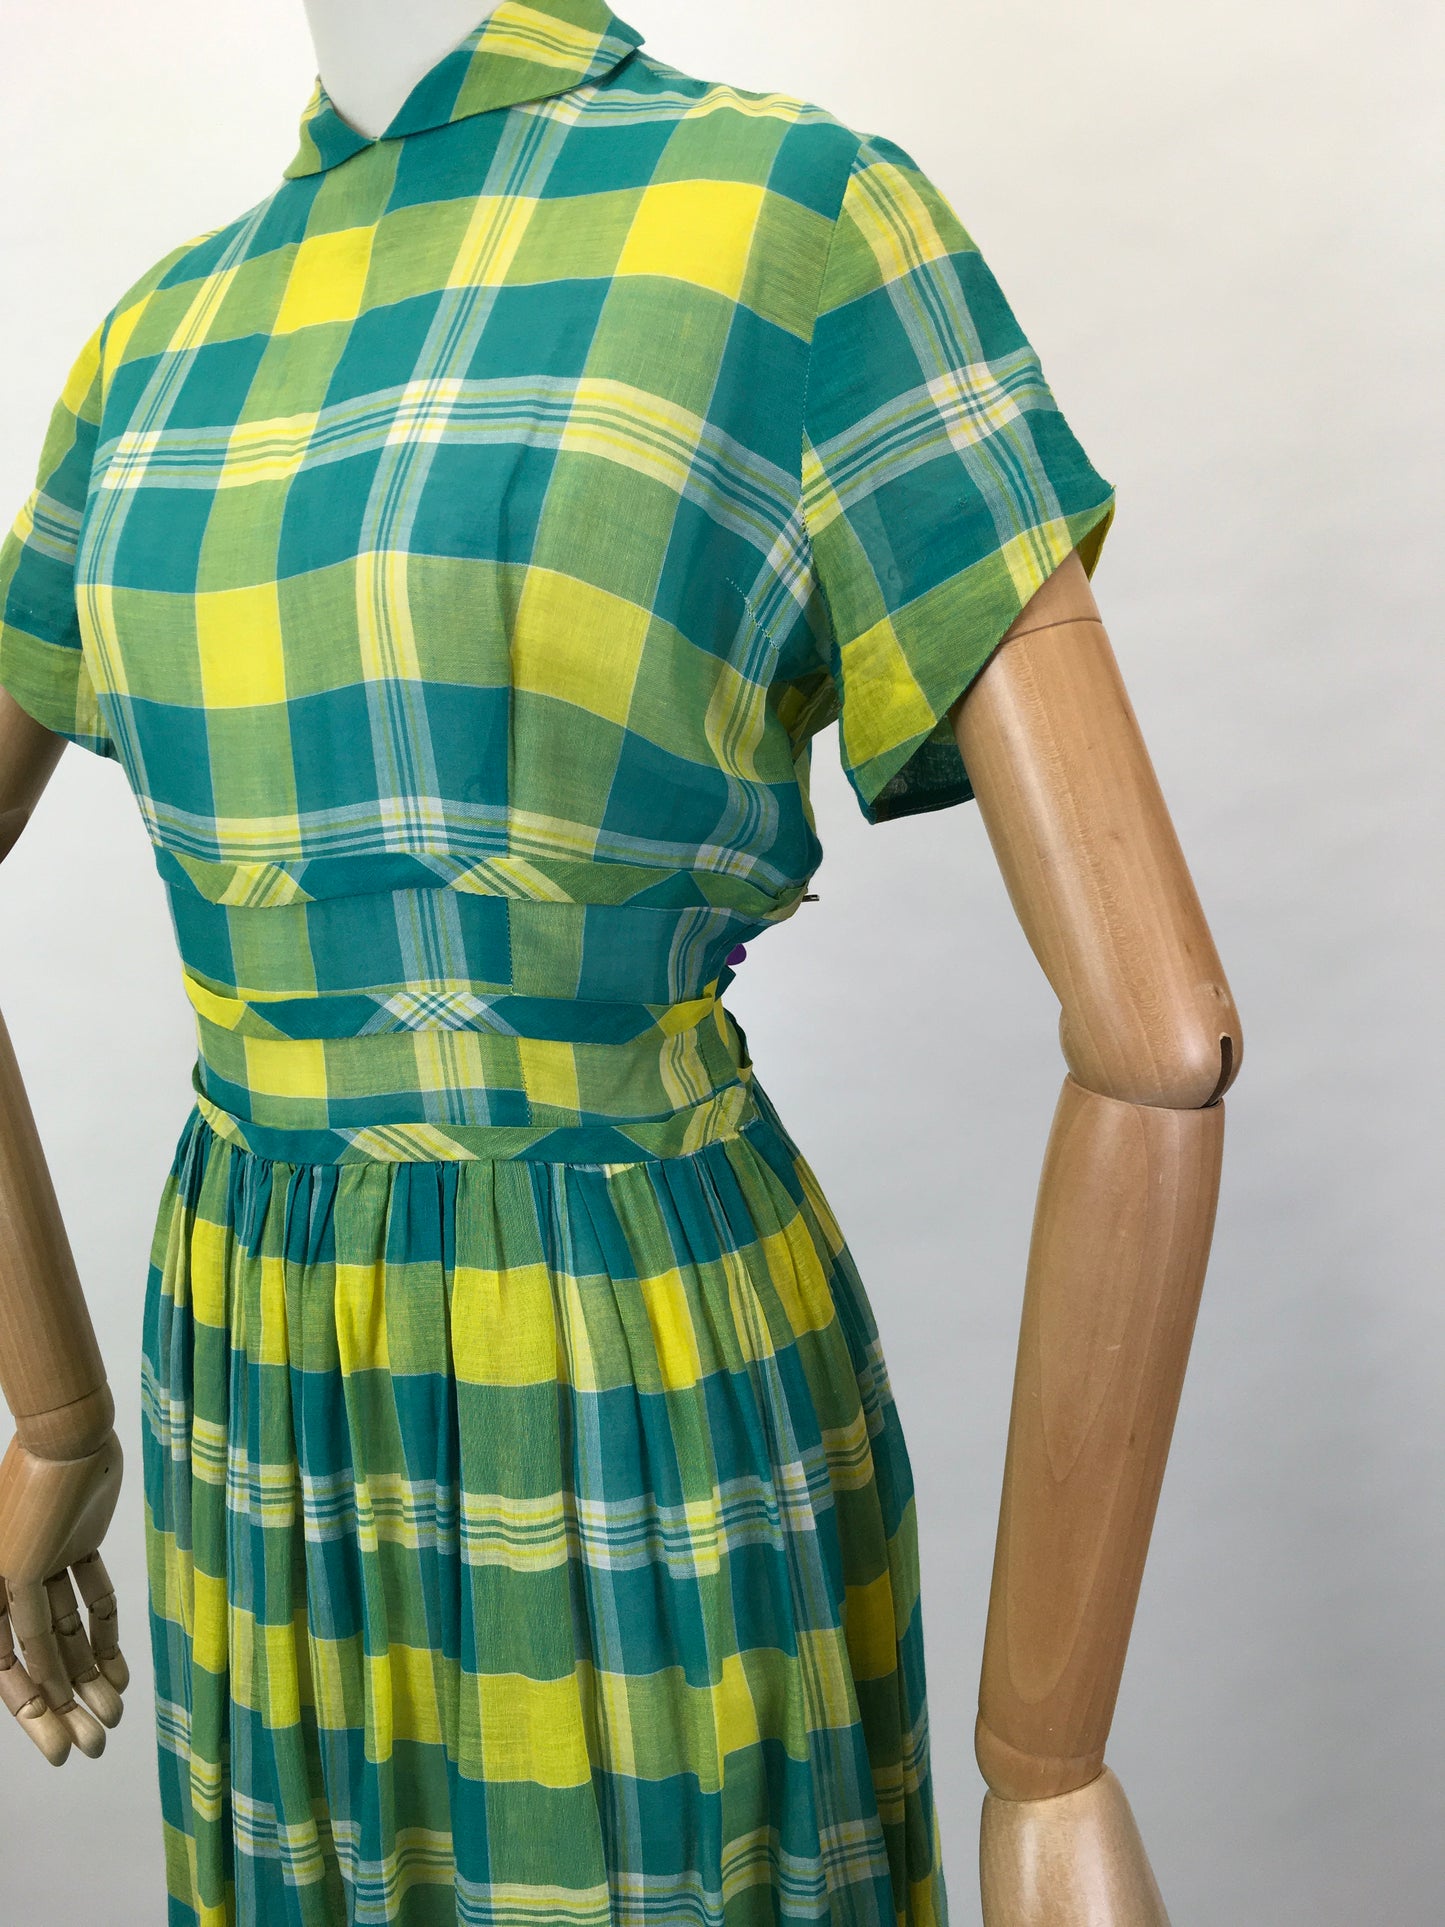 Original Early 1950s Cotton Lawn Day Dress - In a Beautiful Vivid Green and Yellow Plaid